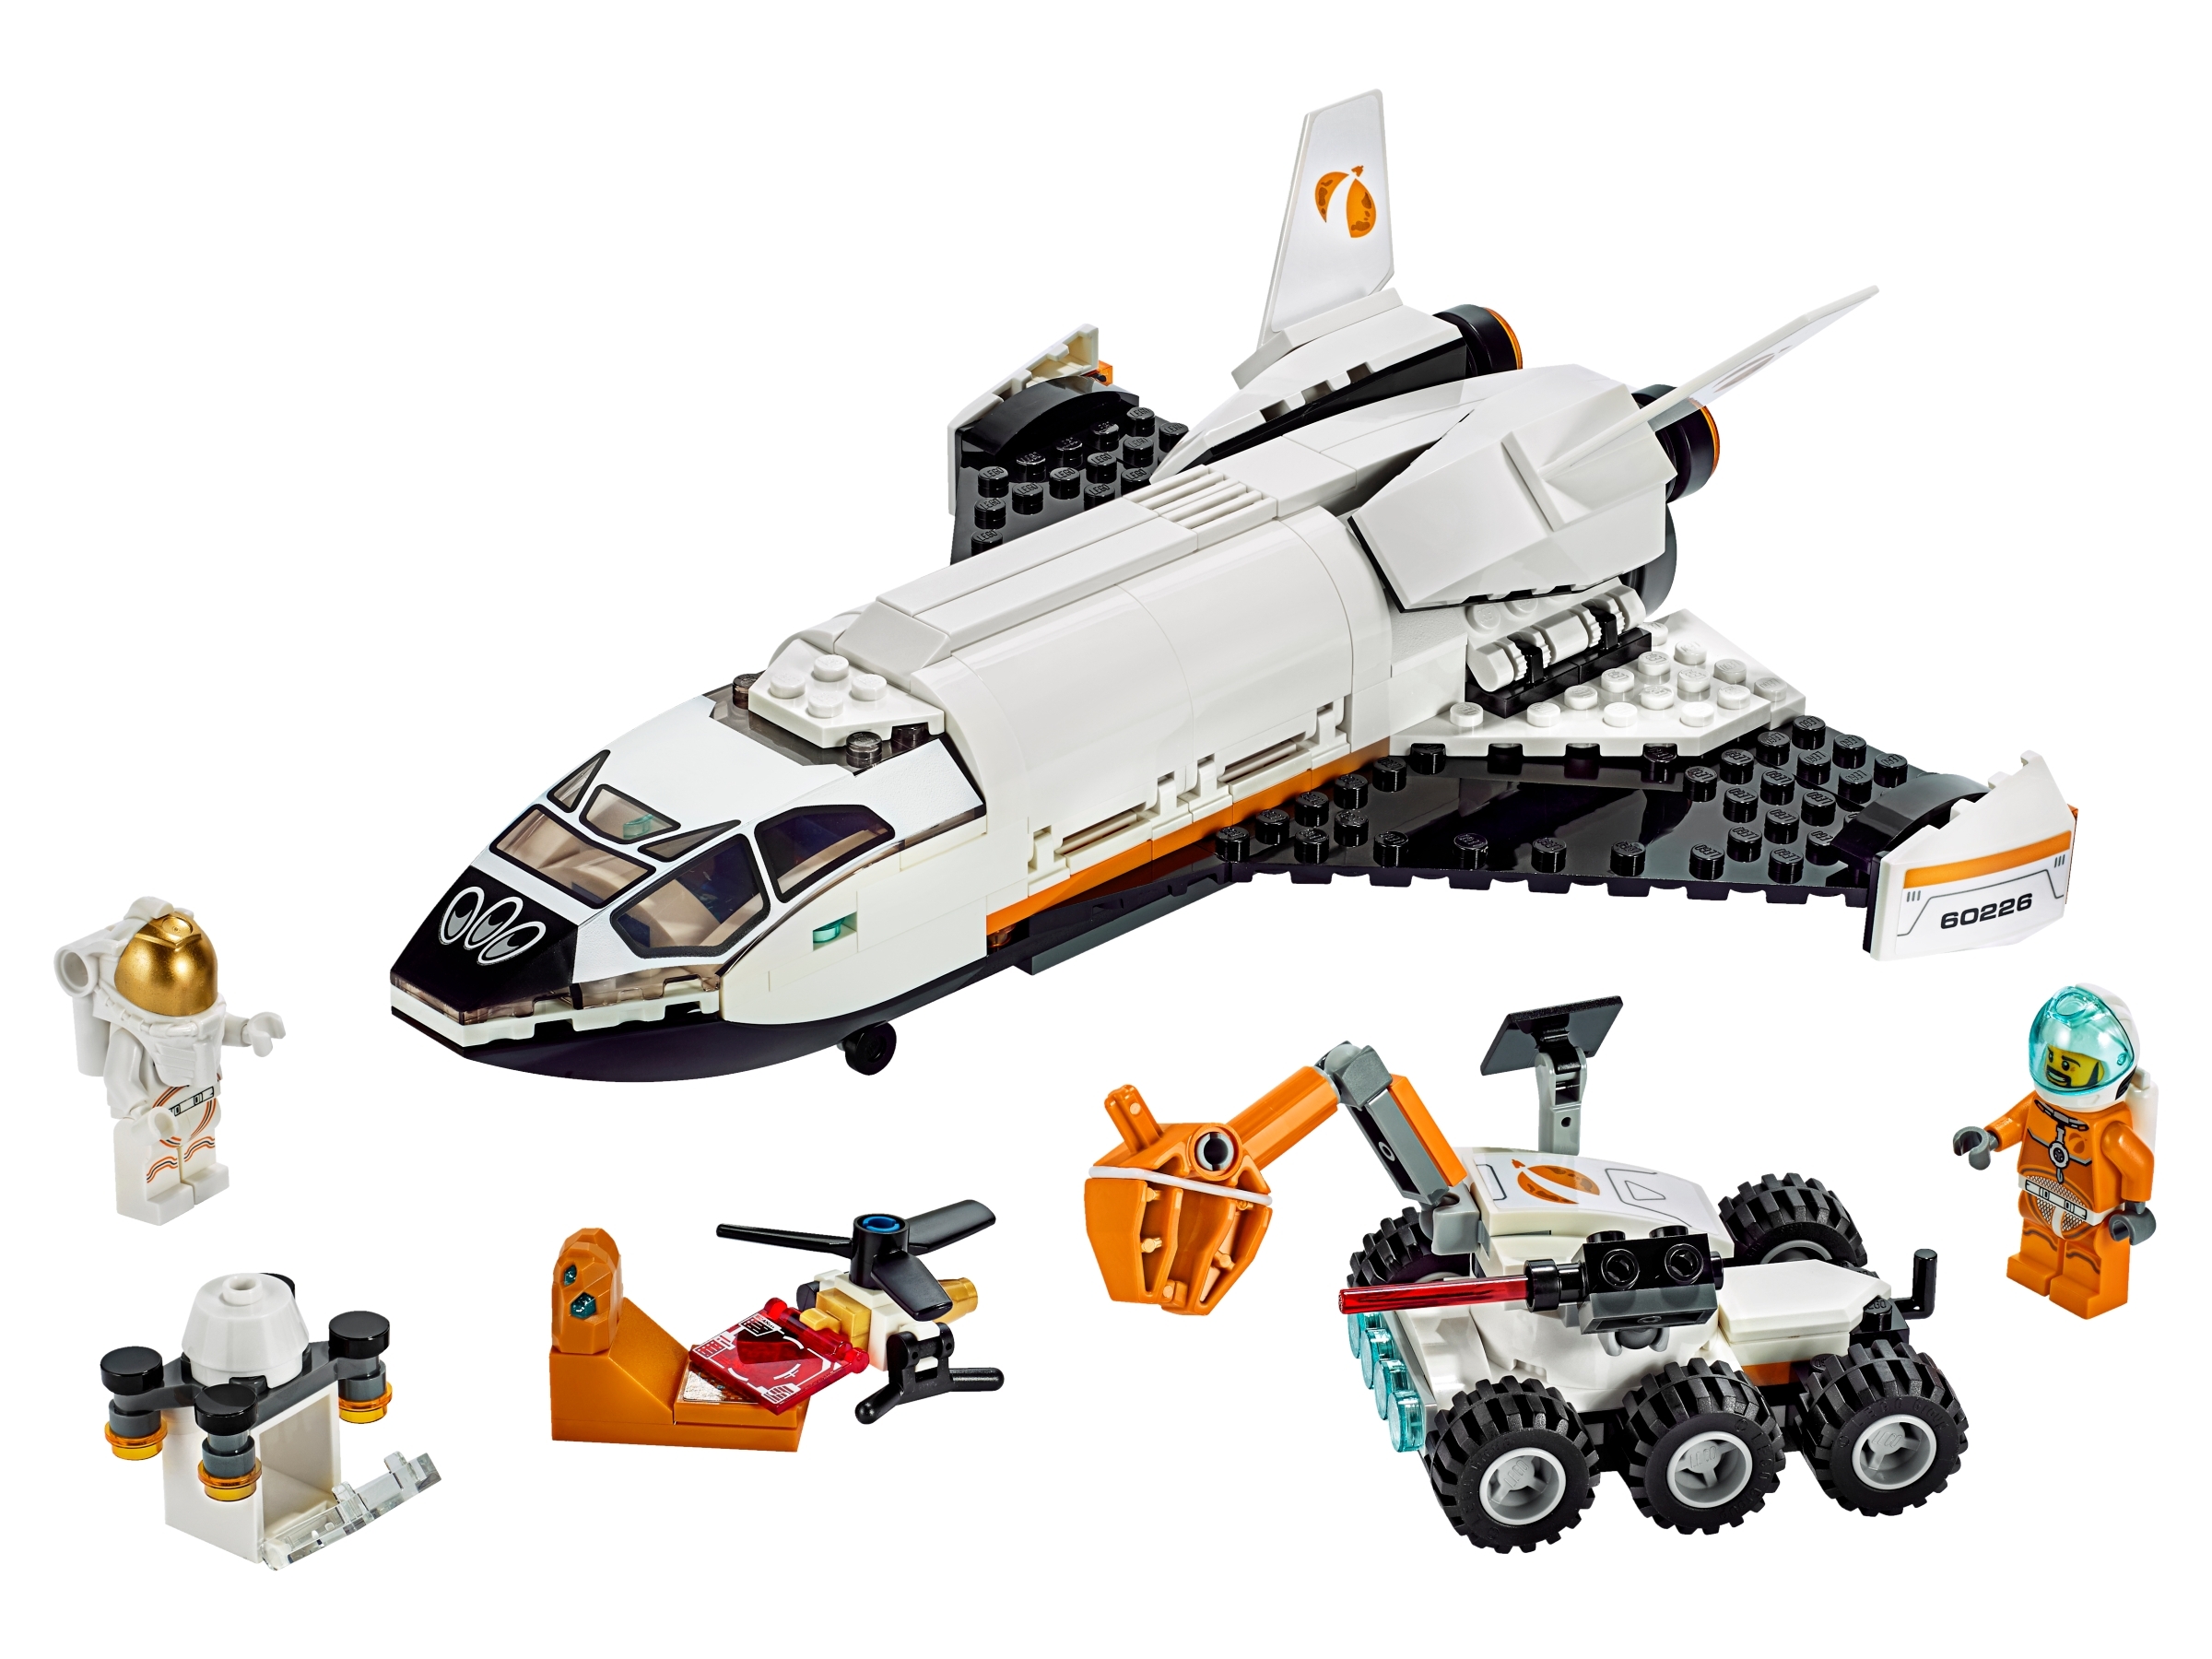 Mars Research Shuttle 60226, City